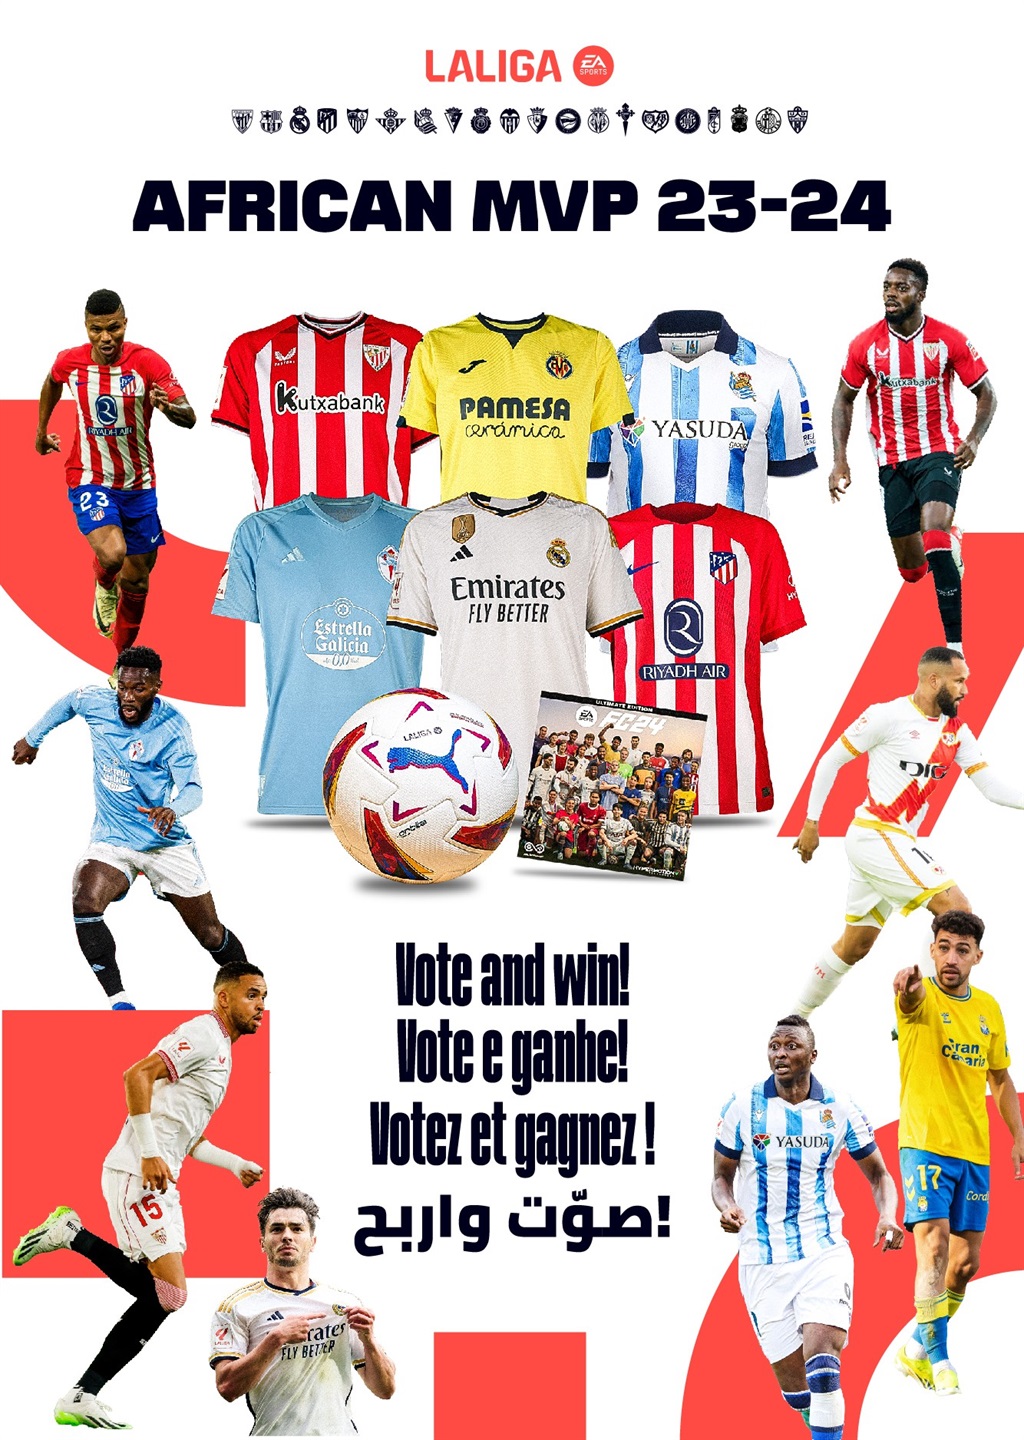 Vote for your LALIGA Africa MVP and win prizes!